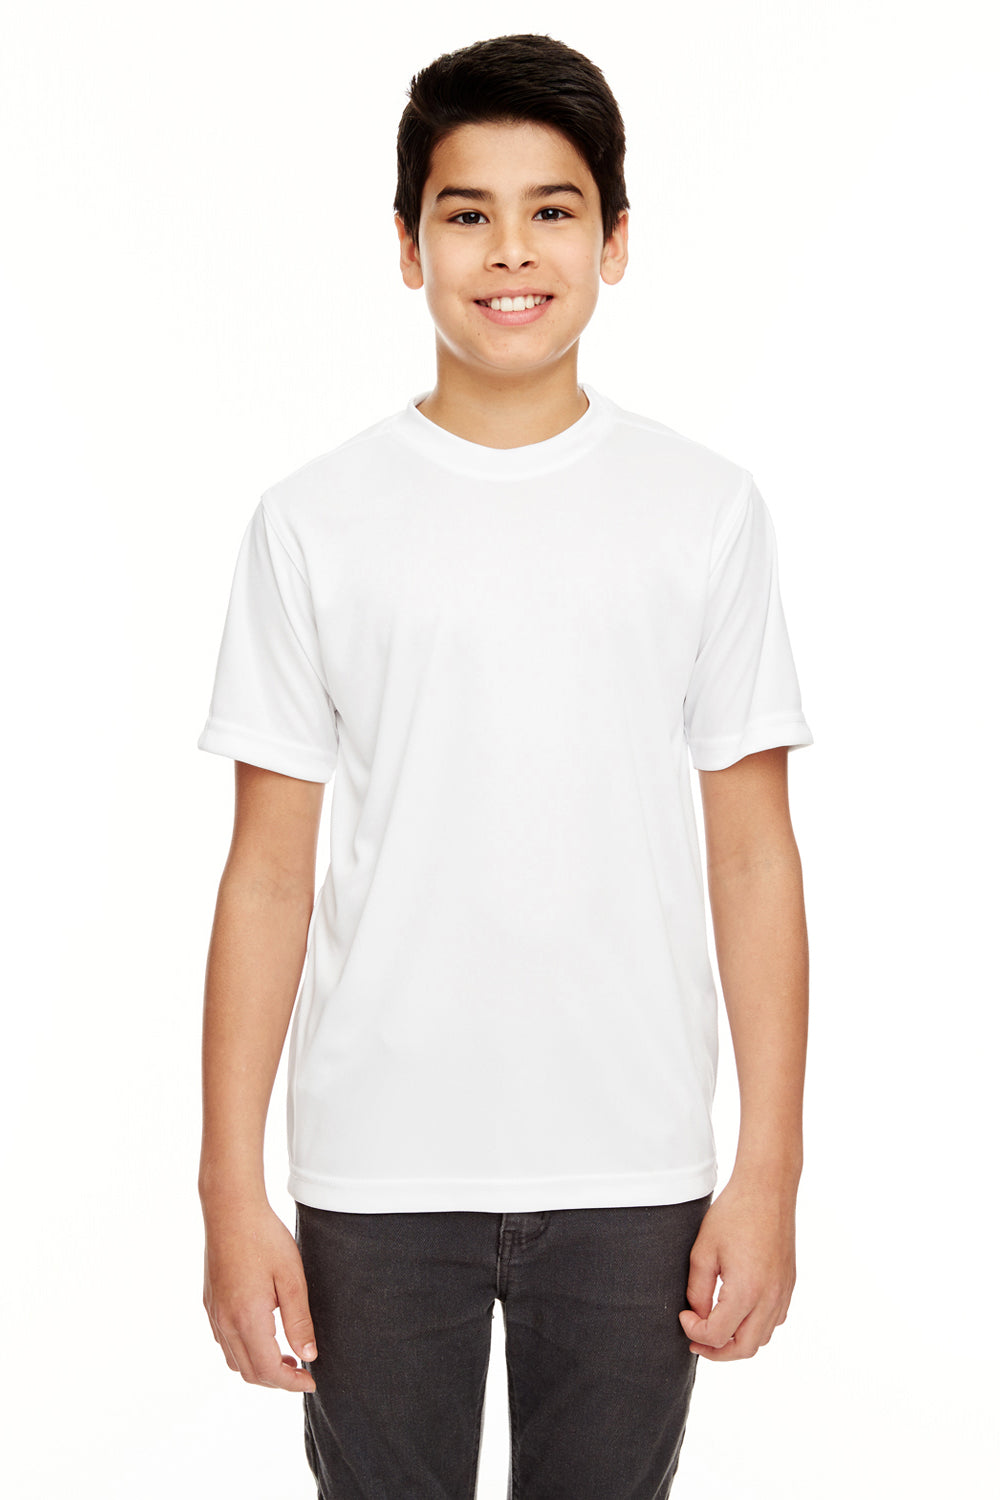 UltraClub 8620Y Youth Cool & Dry Performance Moisture Wicking Short Sleeve Crewneck T-Shirt White Front